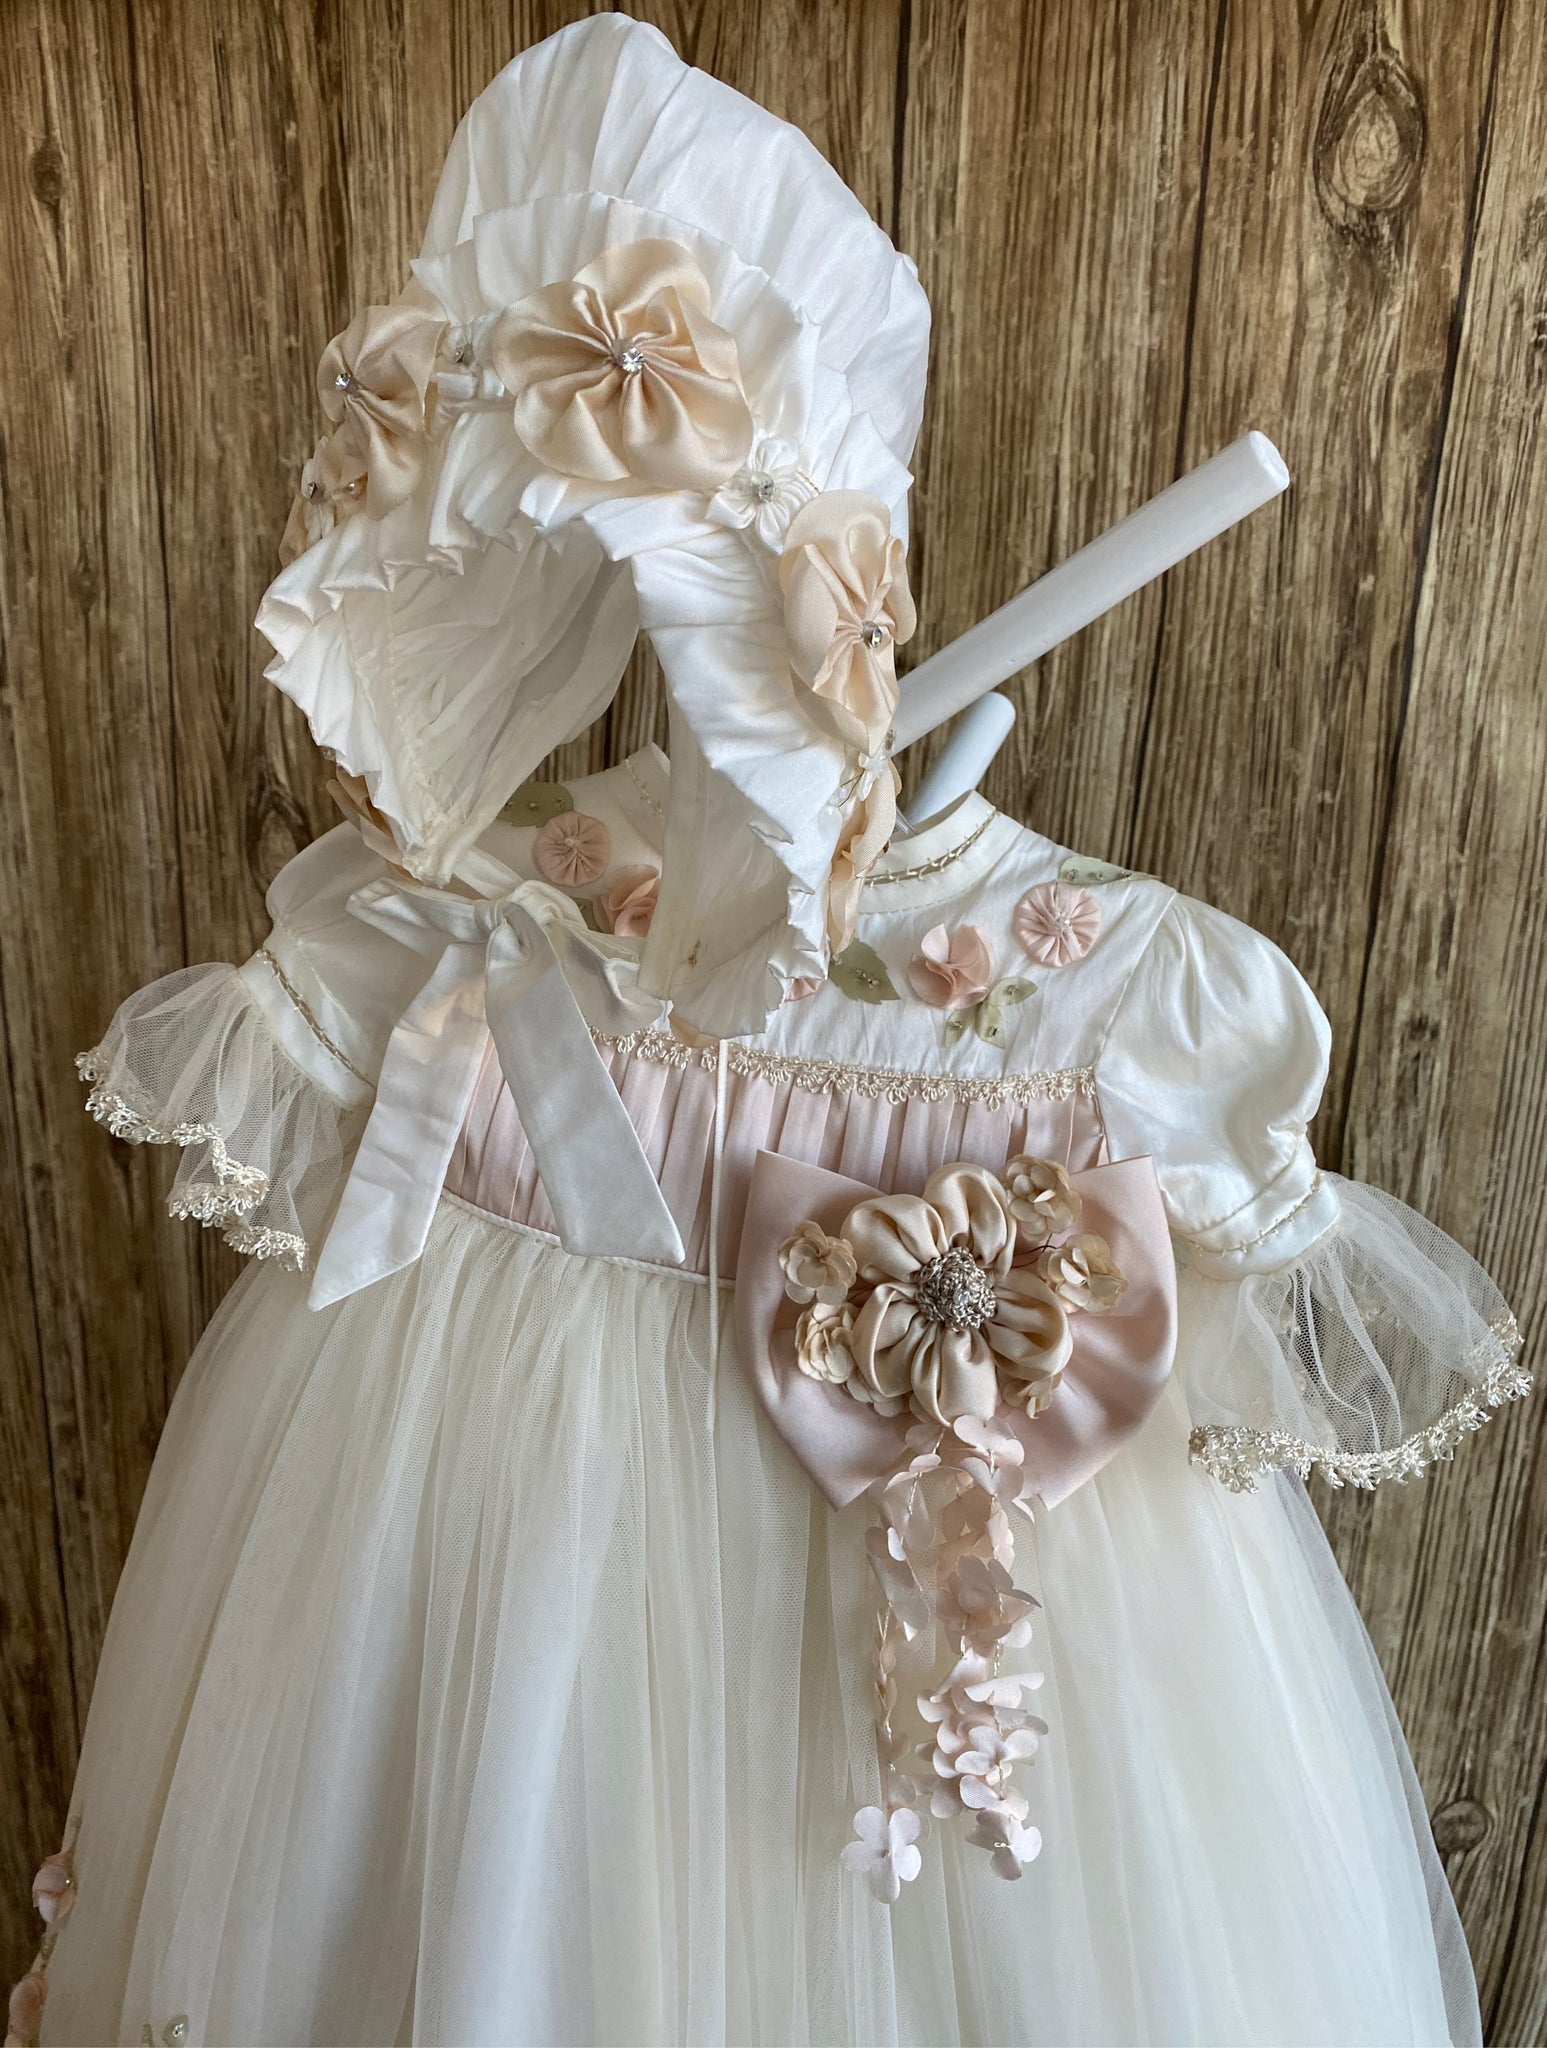 This a beautiful, one-of-a-kind baptism gown.  A lovely gown for a precious child.  Dress, Ivory, size 12M Satin bodice with dusty rose pleating  Organza flowers along bodice Satin puff sleeve with tulle brim Large dusty rose bow with Champaign flower center Tulle skirting with leaf detailing Dusty rose flowers along skirting bottom Slip  Satin bodice Layer one- satin with lace trim Layer two- embroidered lace Layer three- satin with dotted mesh overlay 